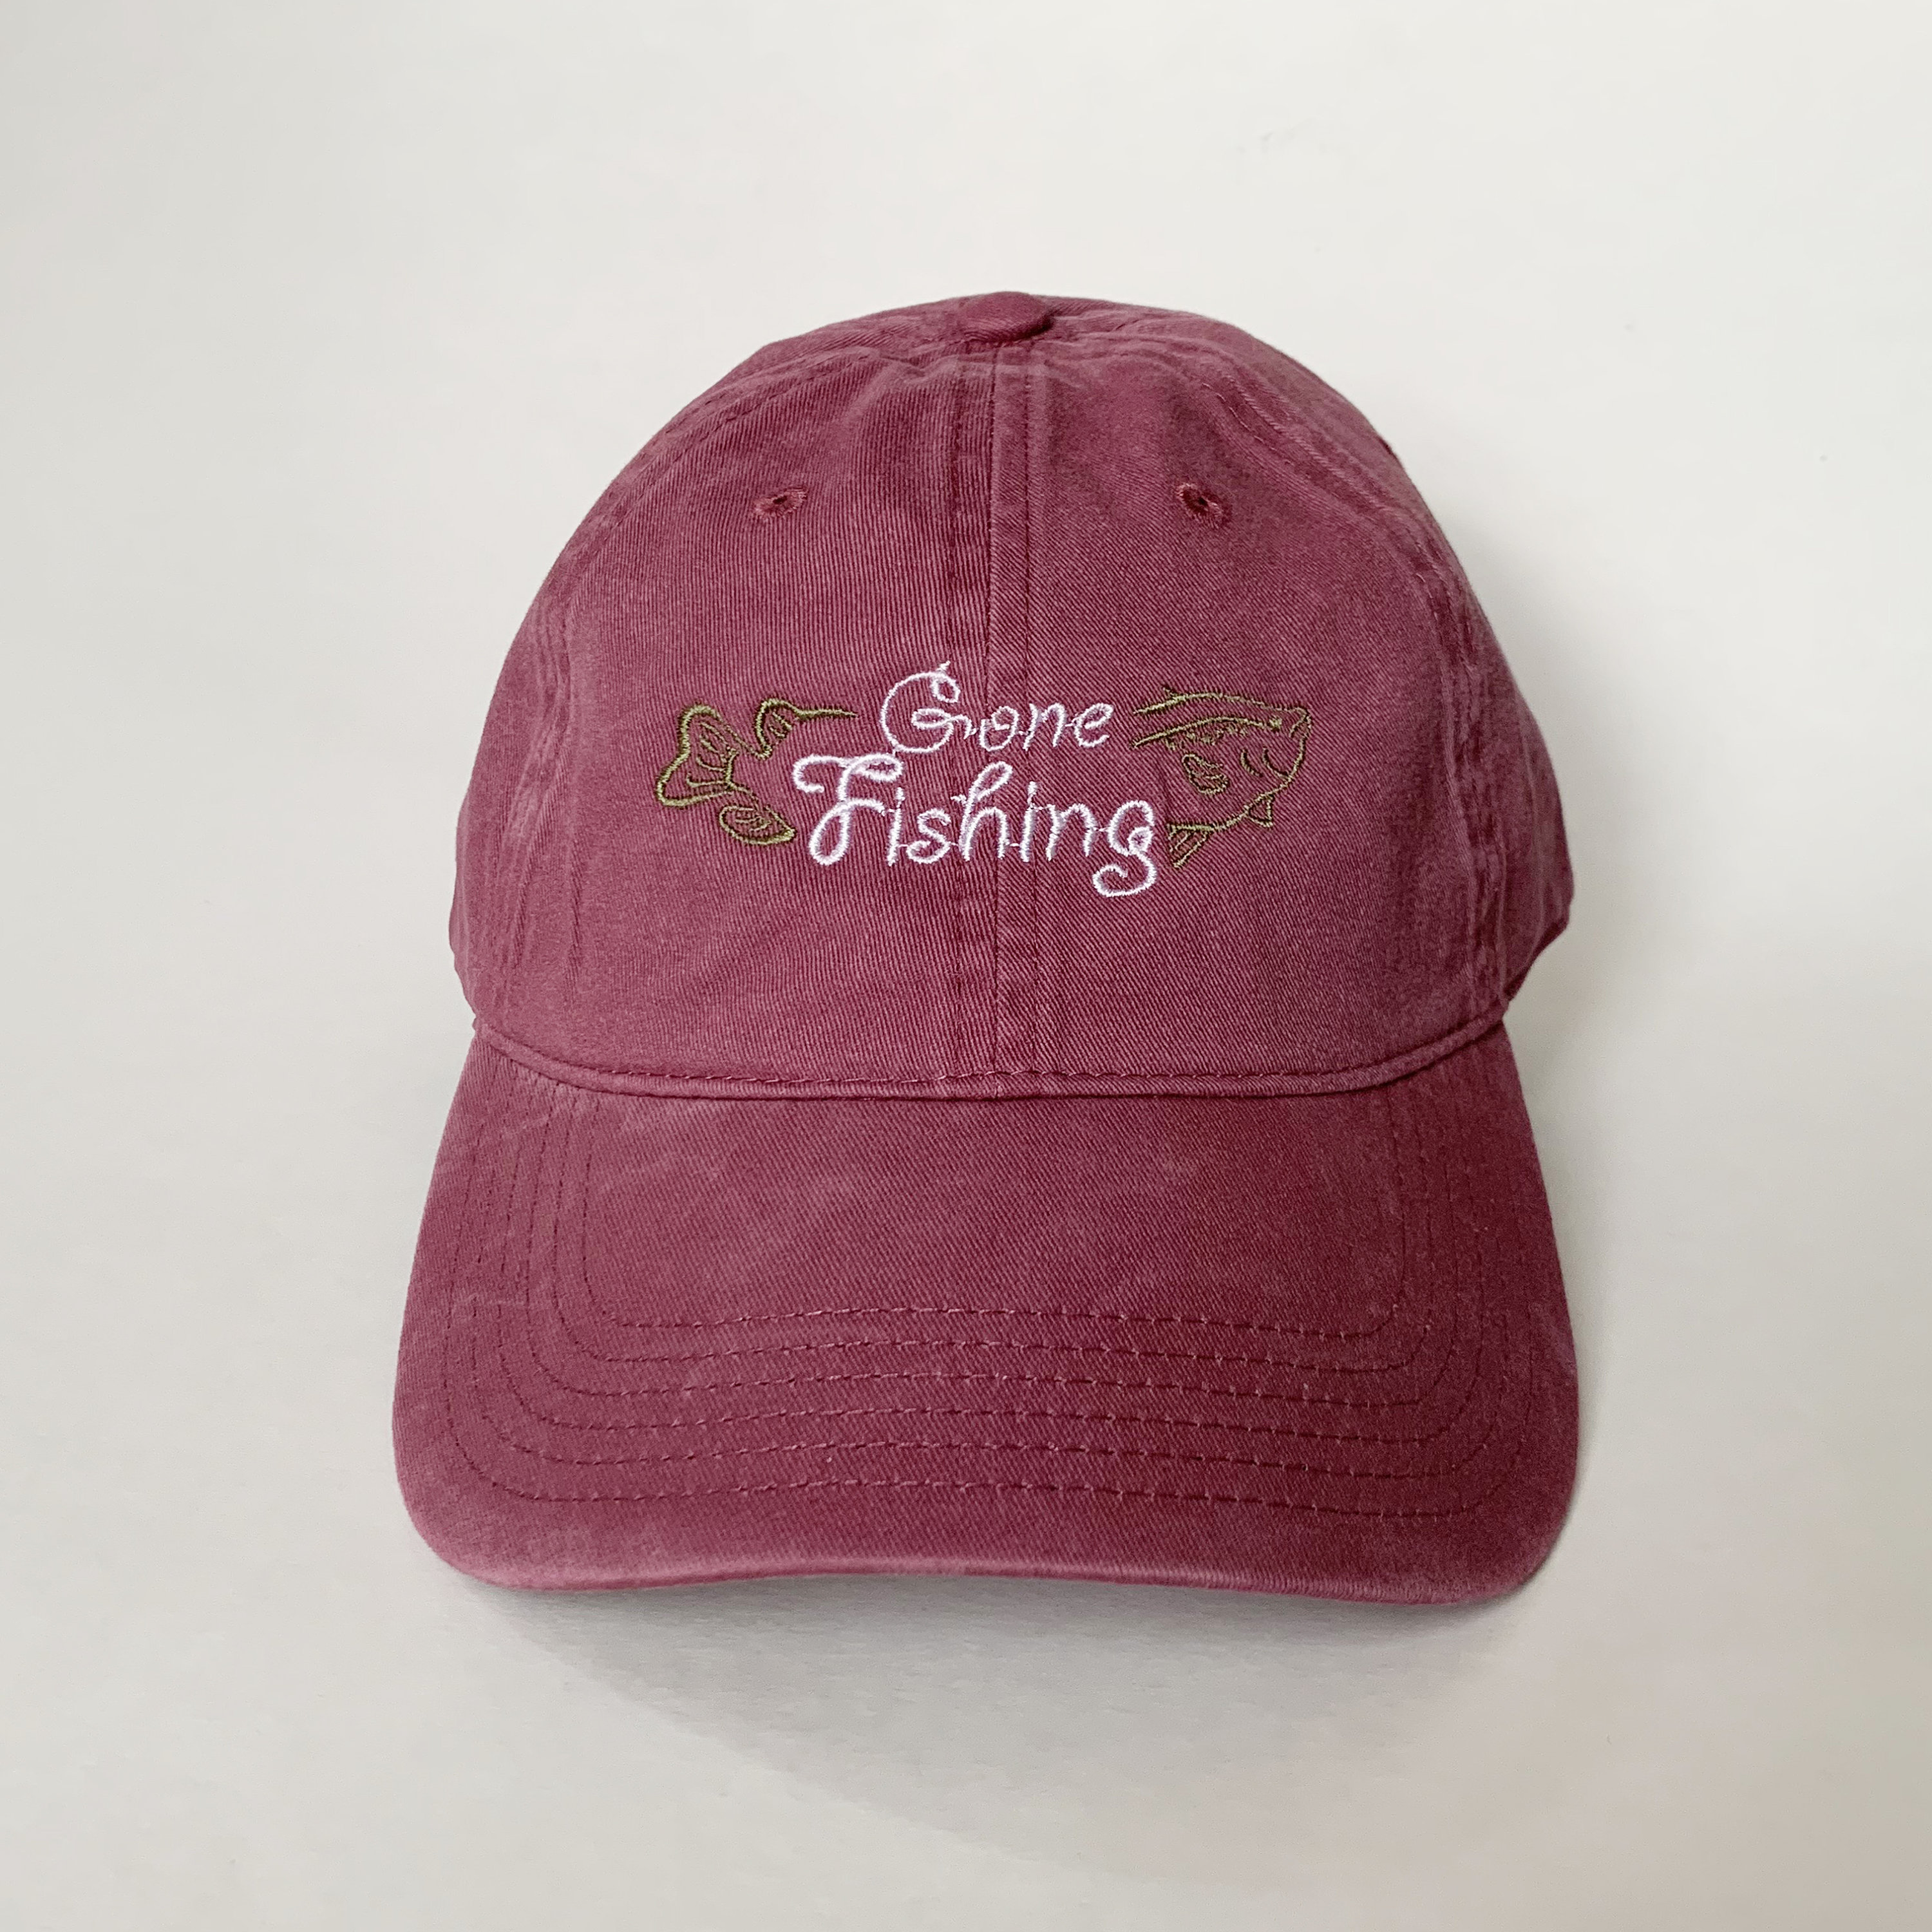 Buy Gone Fishing Embroidered Cap Baseball Hat Washed Dad Cap